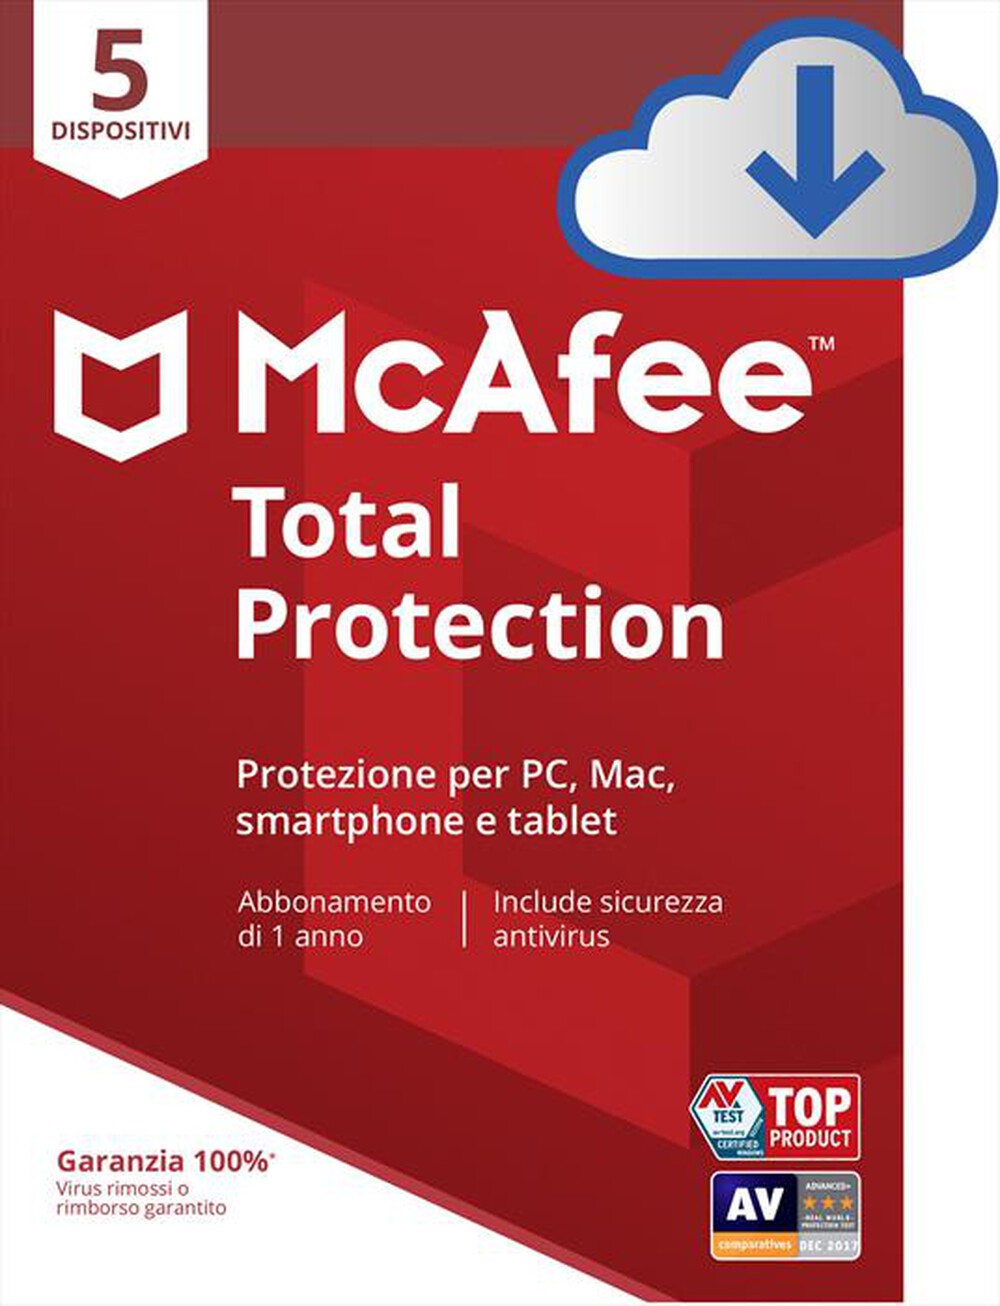 "MCAFEE - Total Protection 5D"